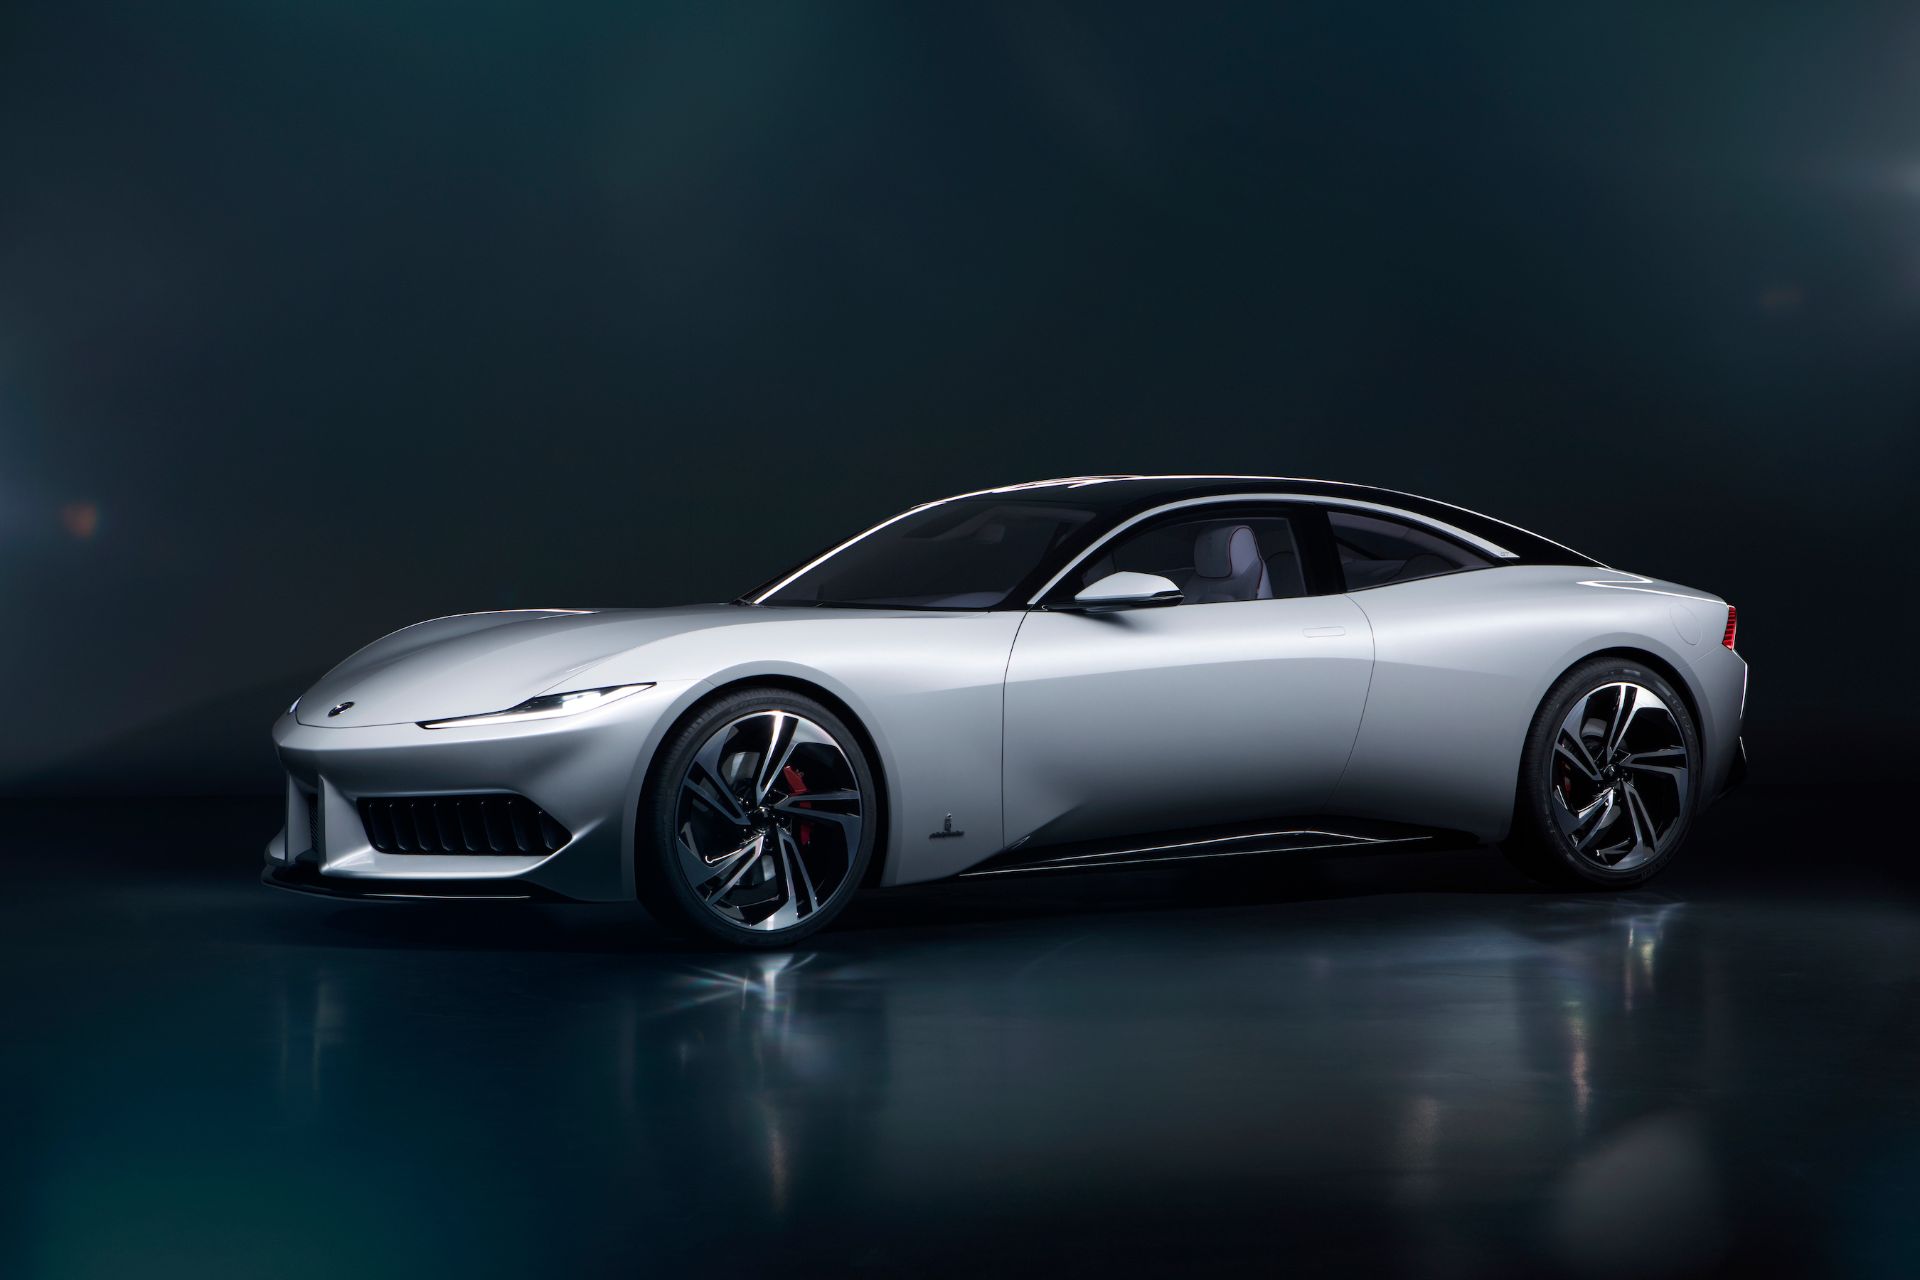 Karma Looks To The Future With Pininfarina Gt And Vision Concepts